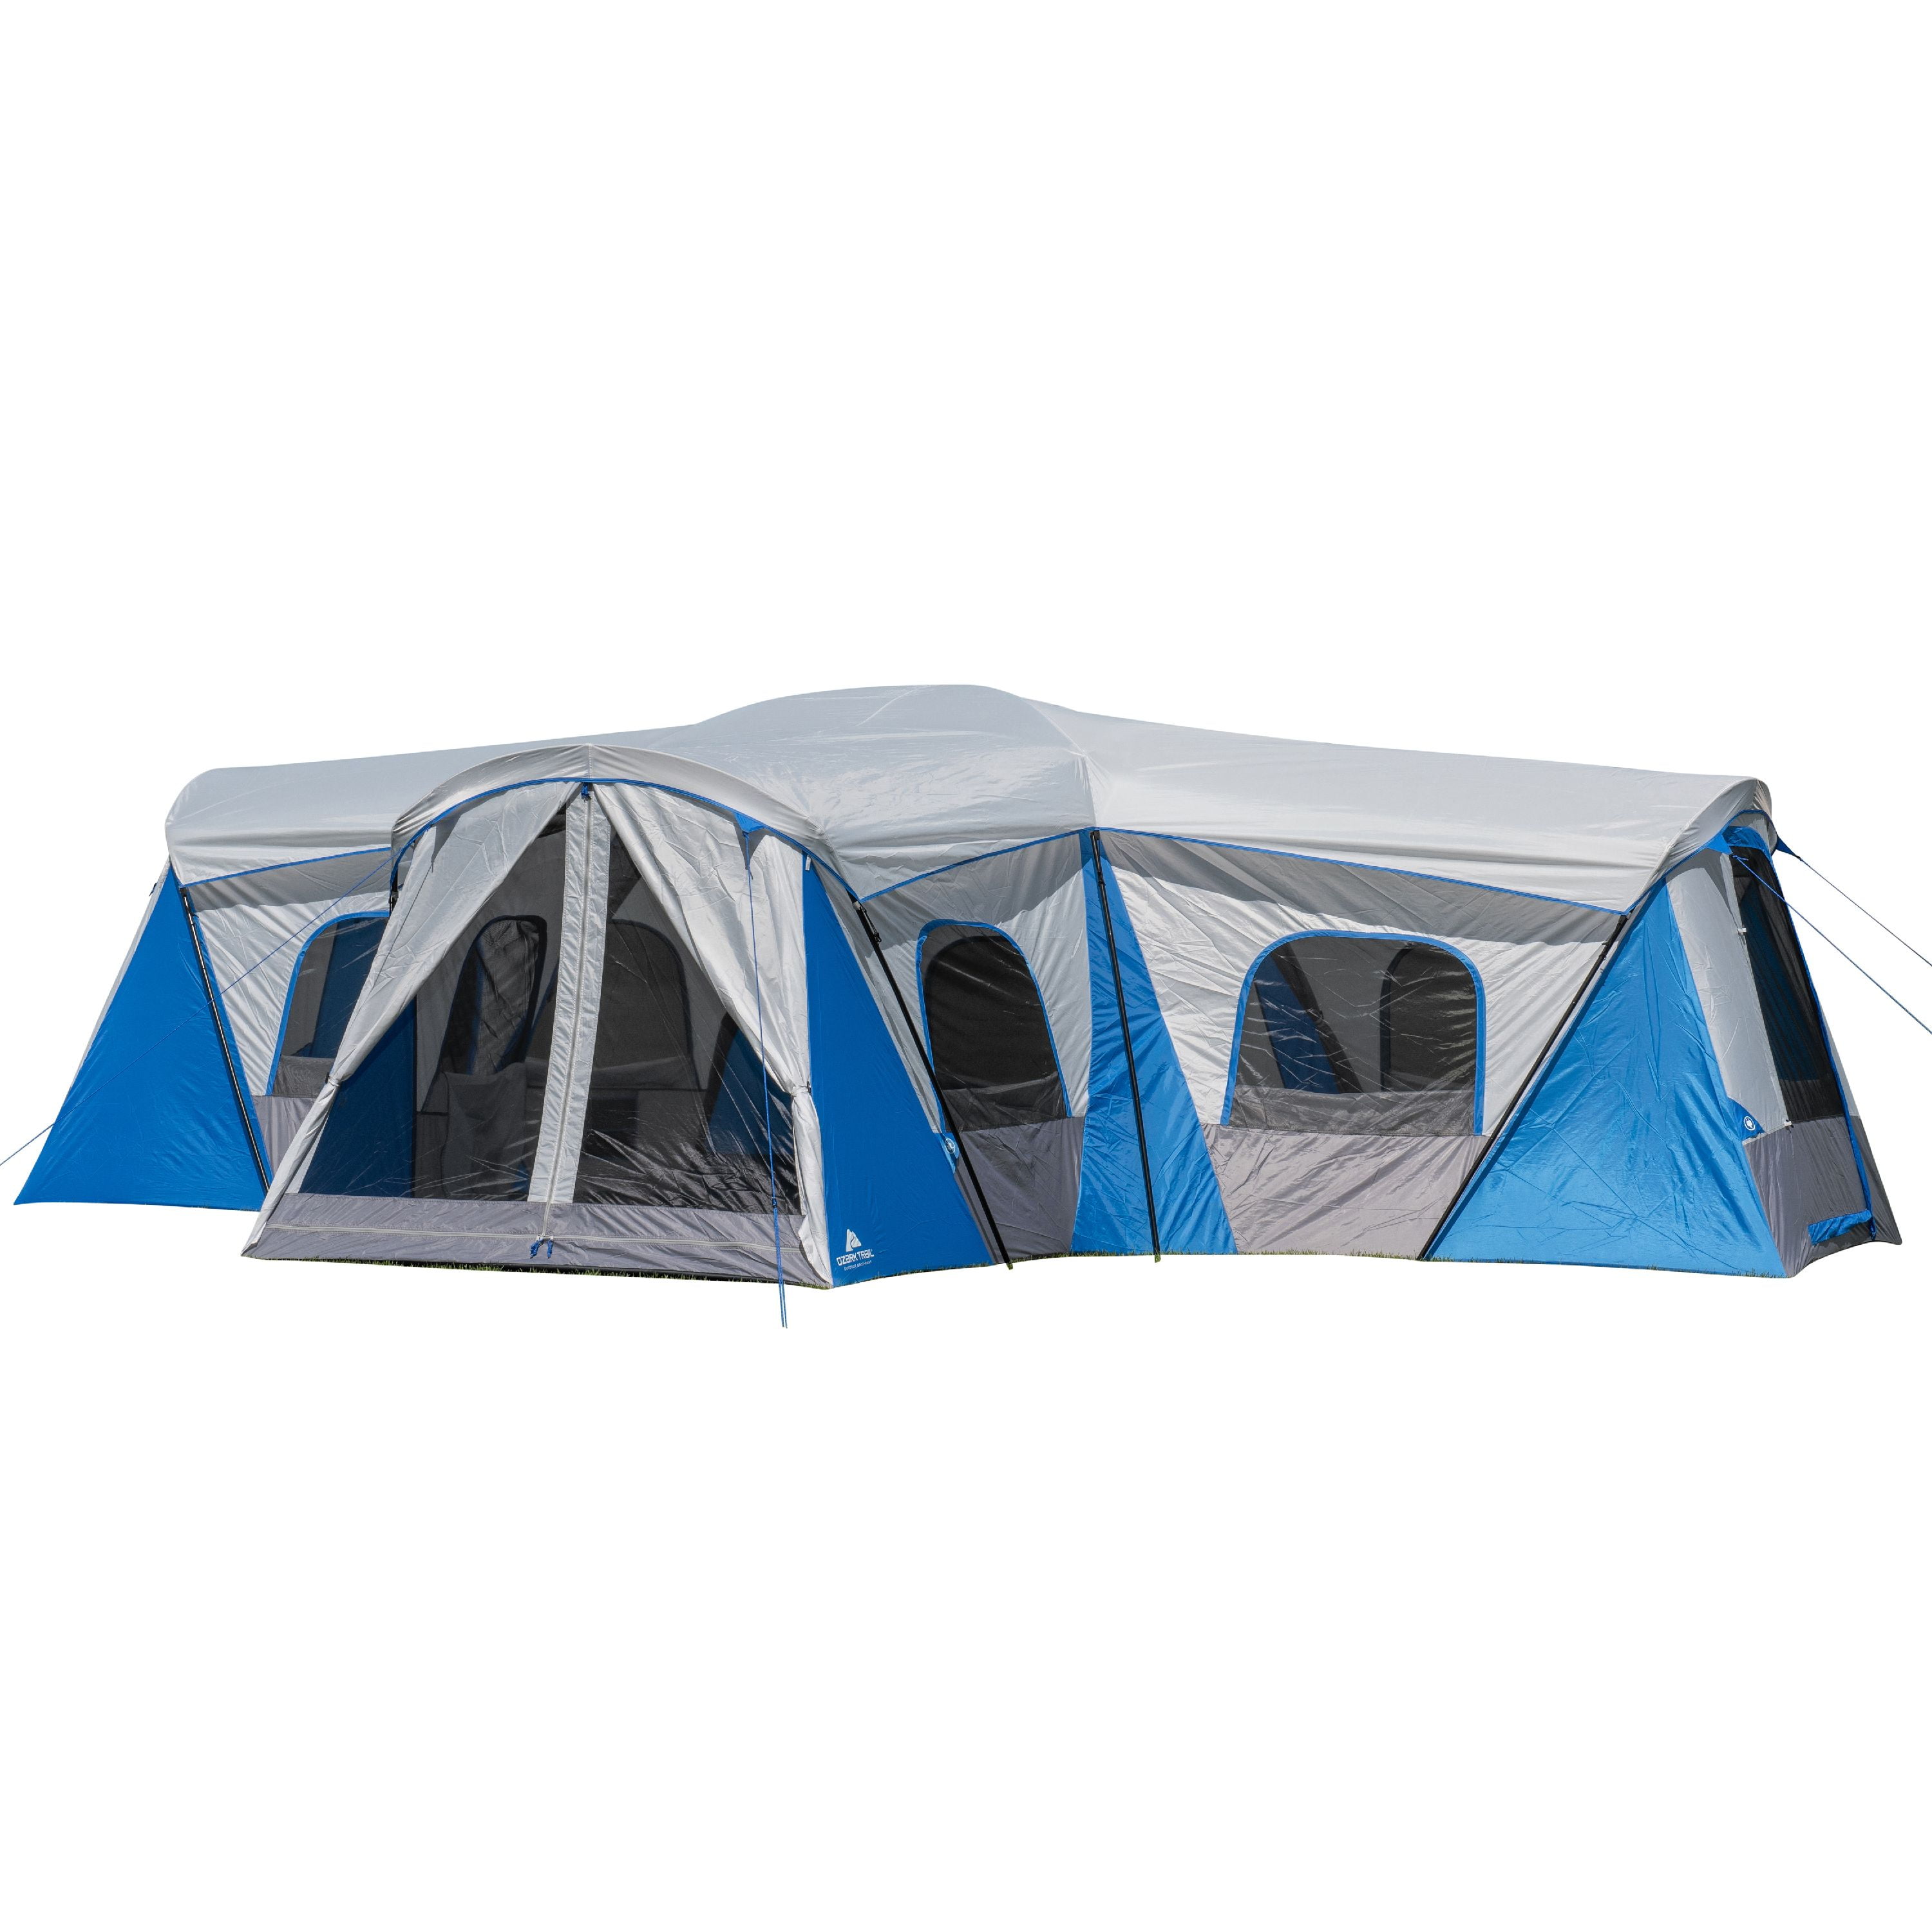 Large Tent Camping Outdoor Ozark Trail 3 Room 10 Person Waterproof 